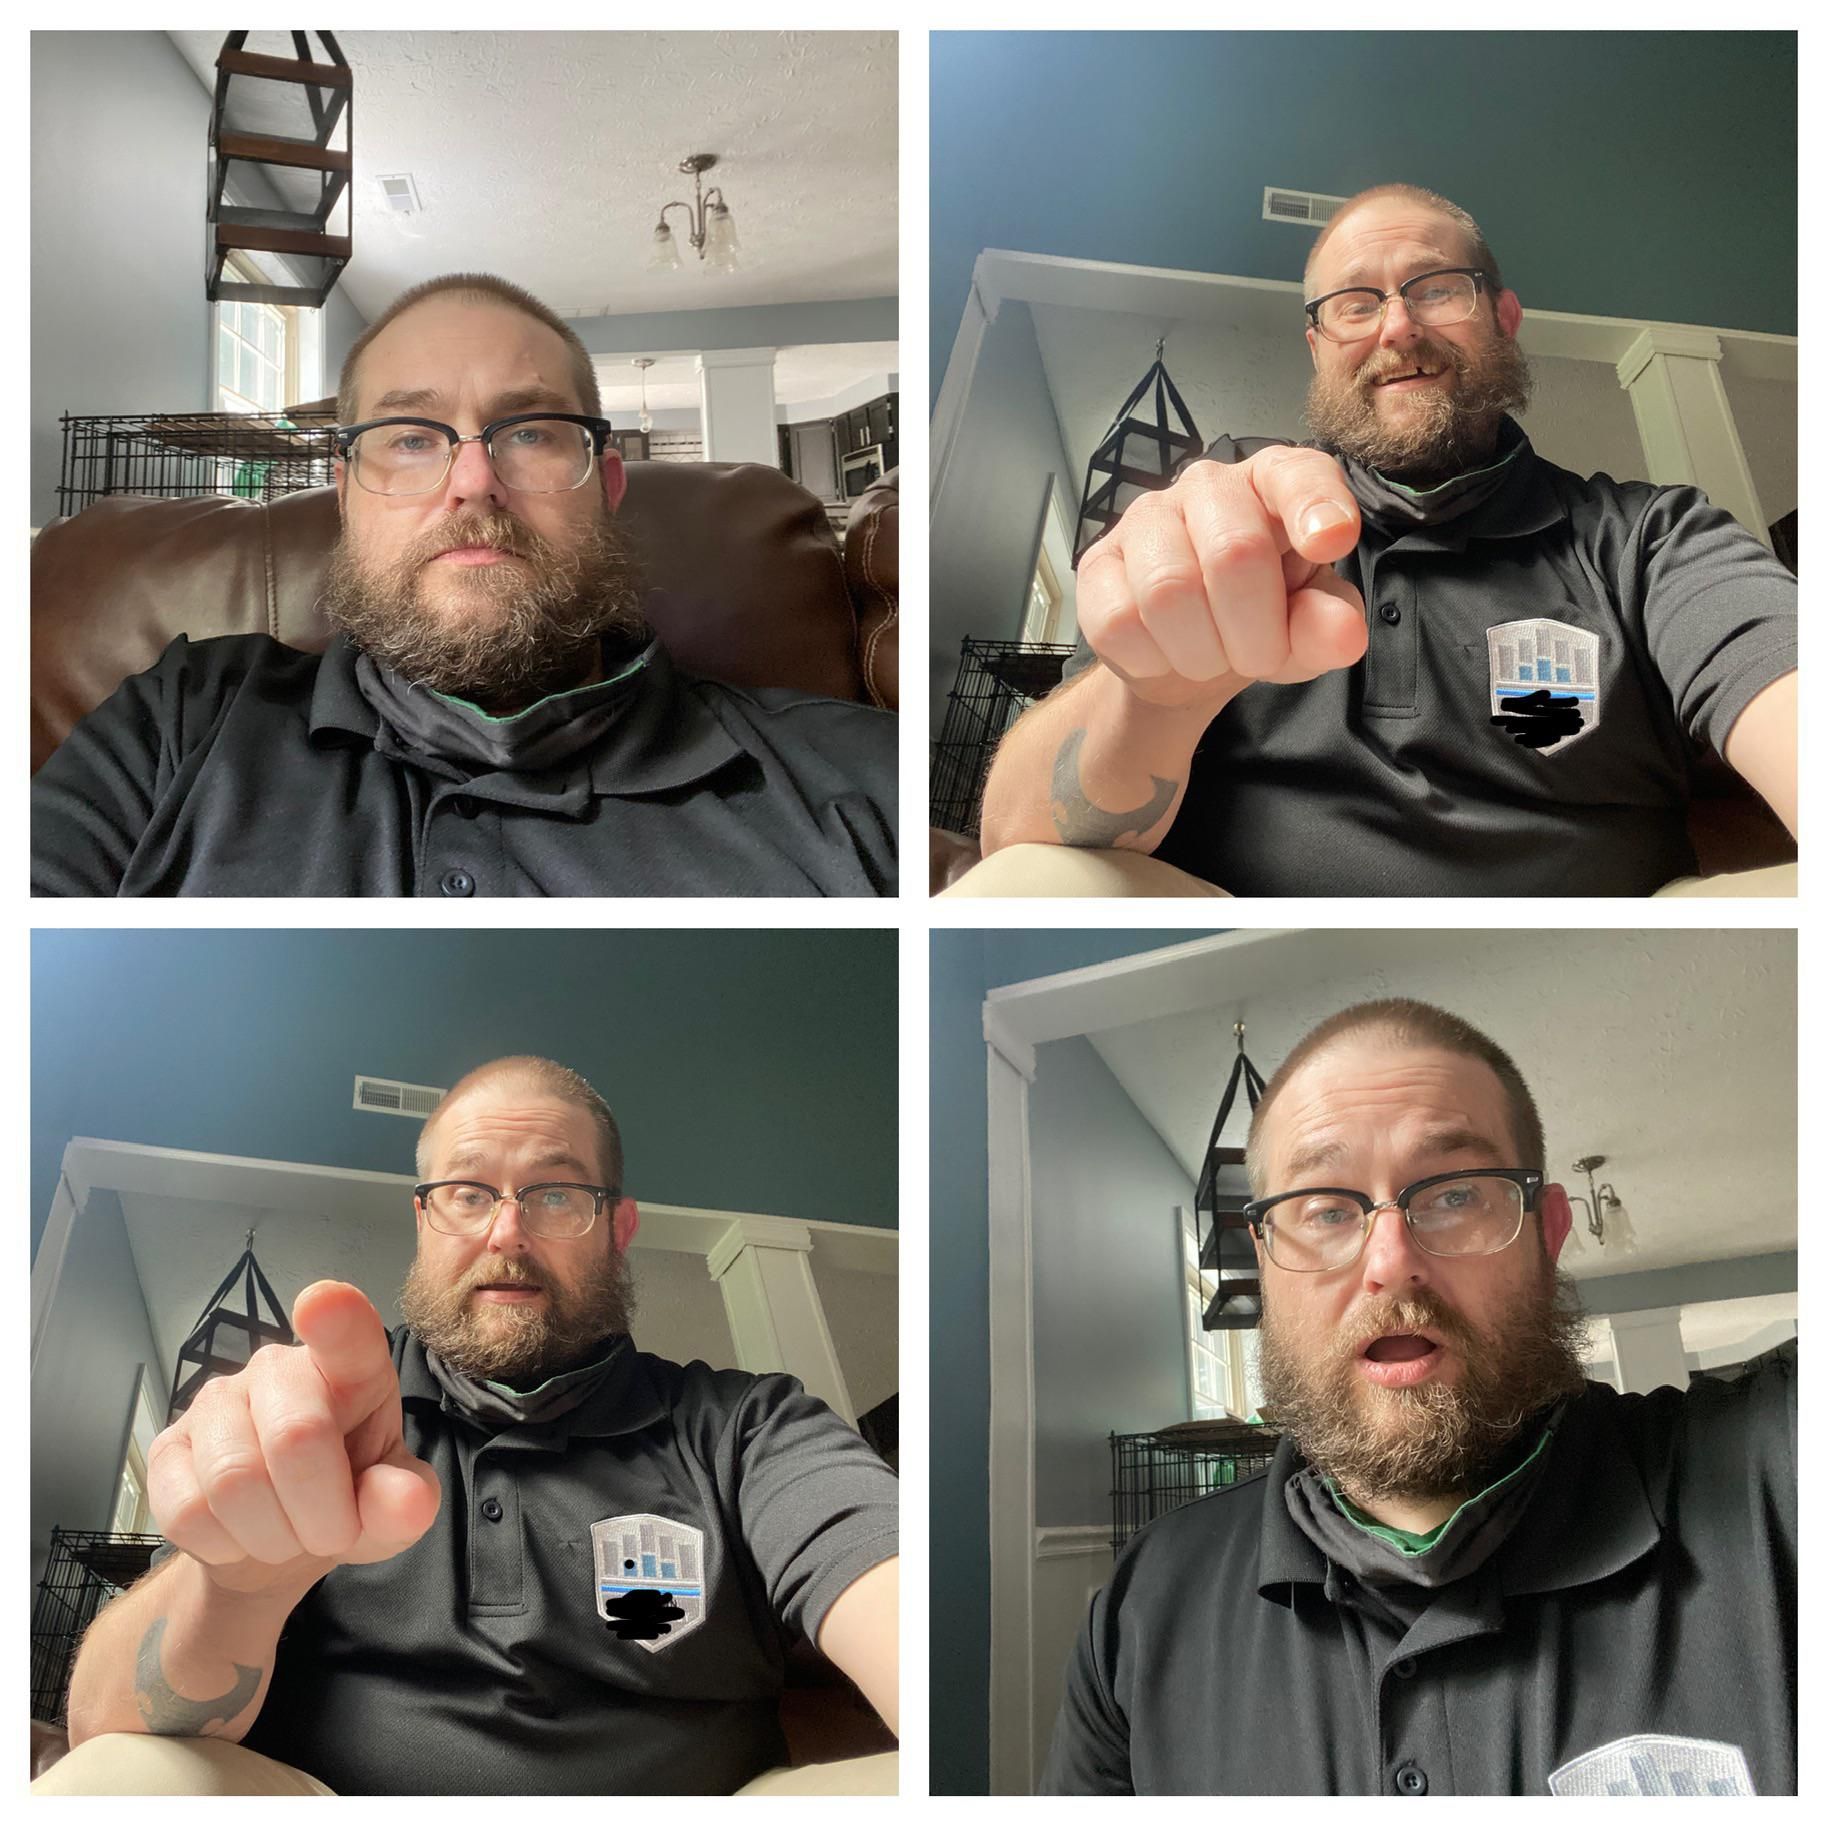 It took 16 experienced IT professionals 45 minutes to realize I was switching between 4 static images during our Microsoft Teams meeting.